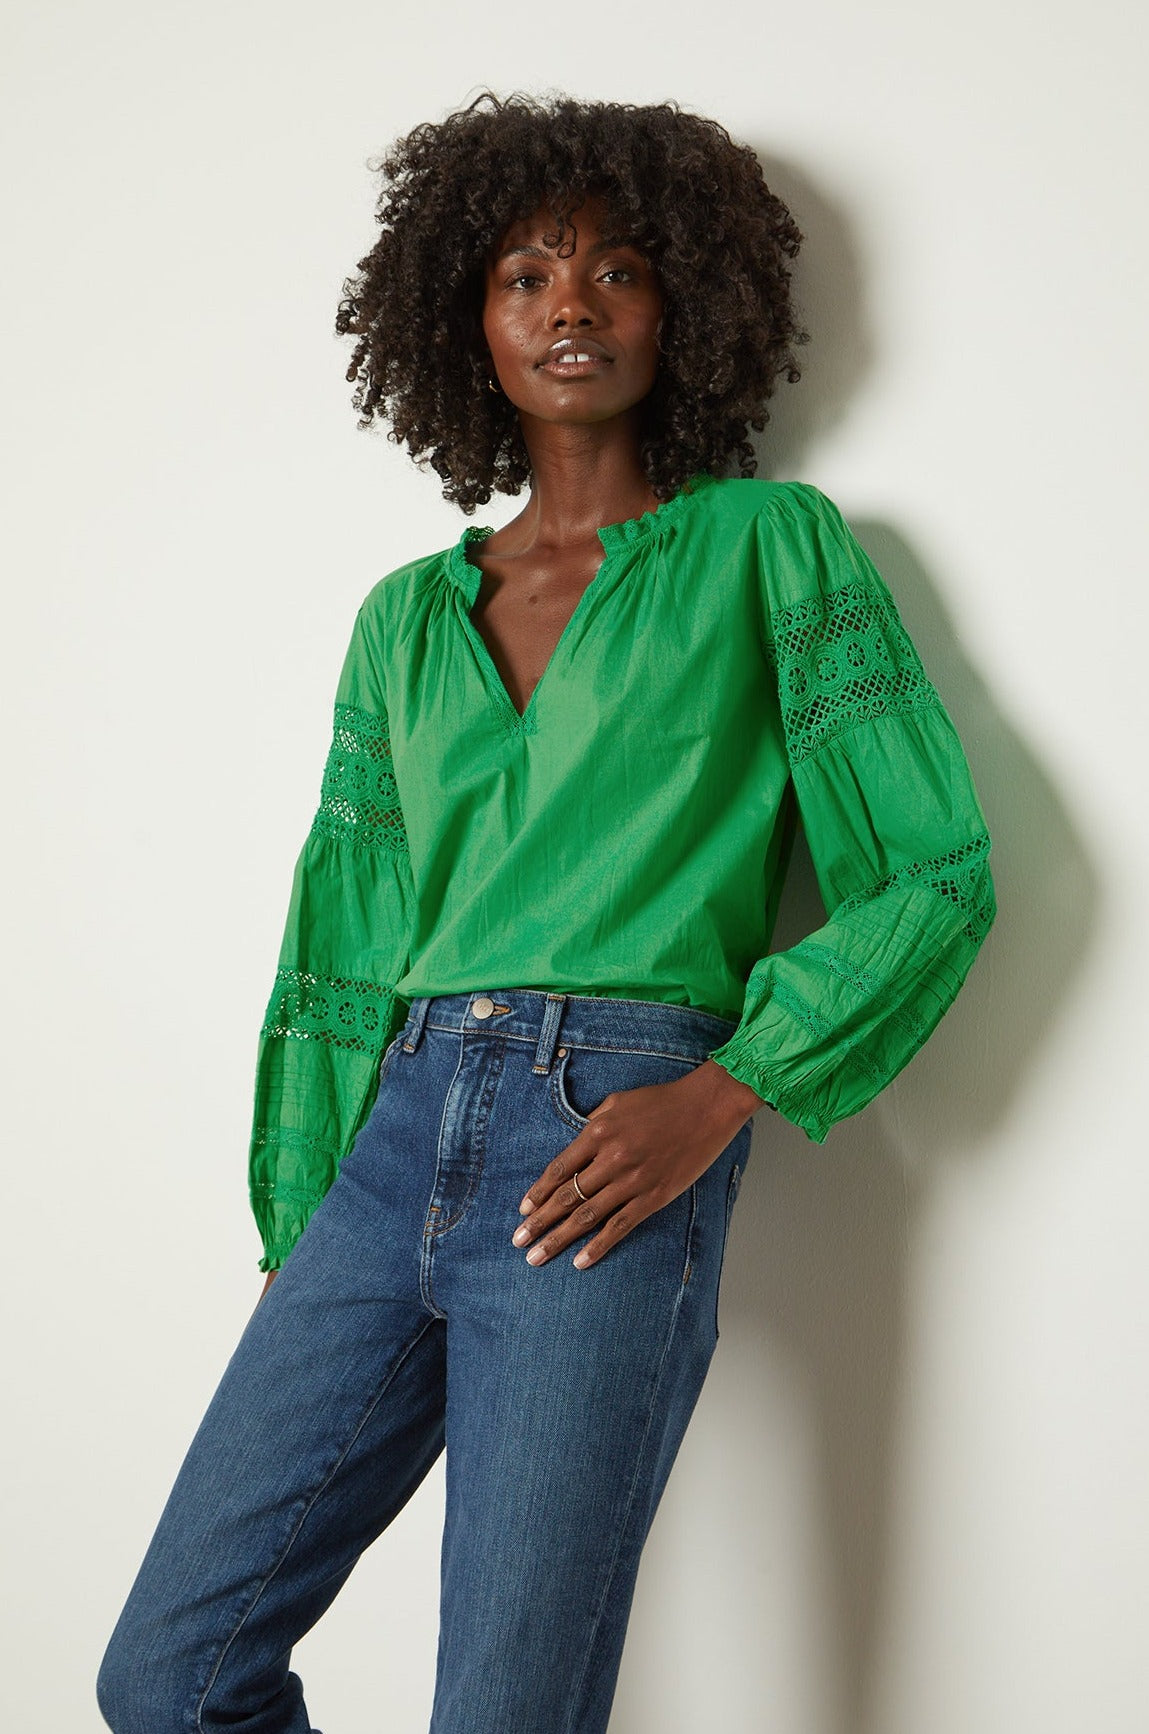   a black woman wearing jeans and a green blouse, the TAYLER COTTON LACE BOHO TOP by Velvet by Graham & Spencer. 